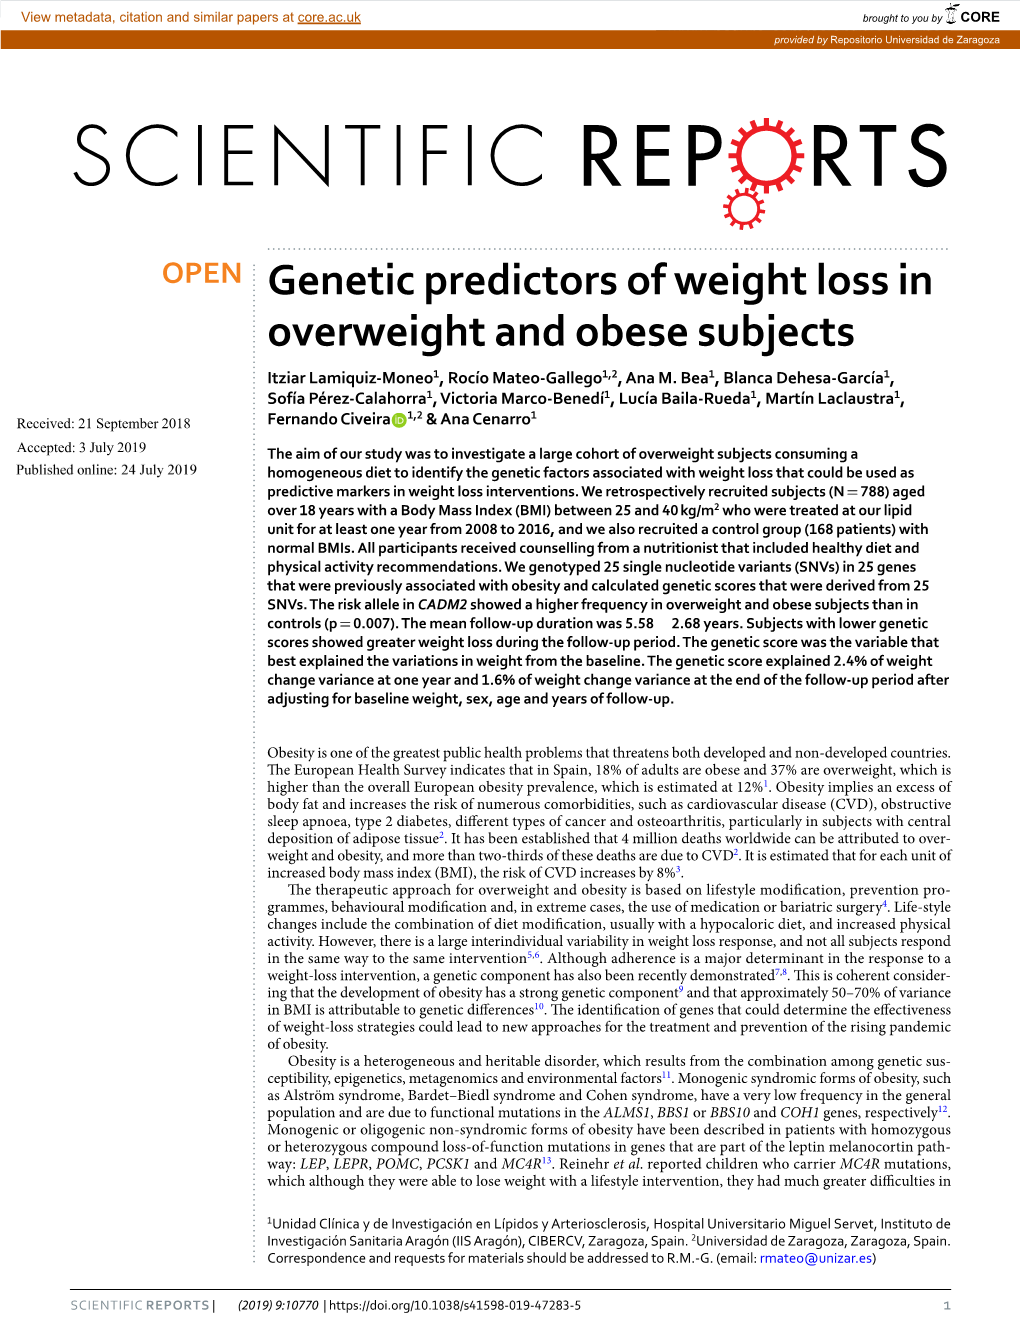 Genetic Predictors of Weight Loss in Overweight and Obese Subjects Itziar Lamiquiz-Moneo1, Rocío Mateo-Gallego1,2, Ana M